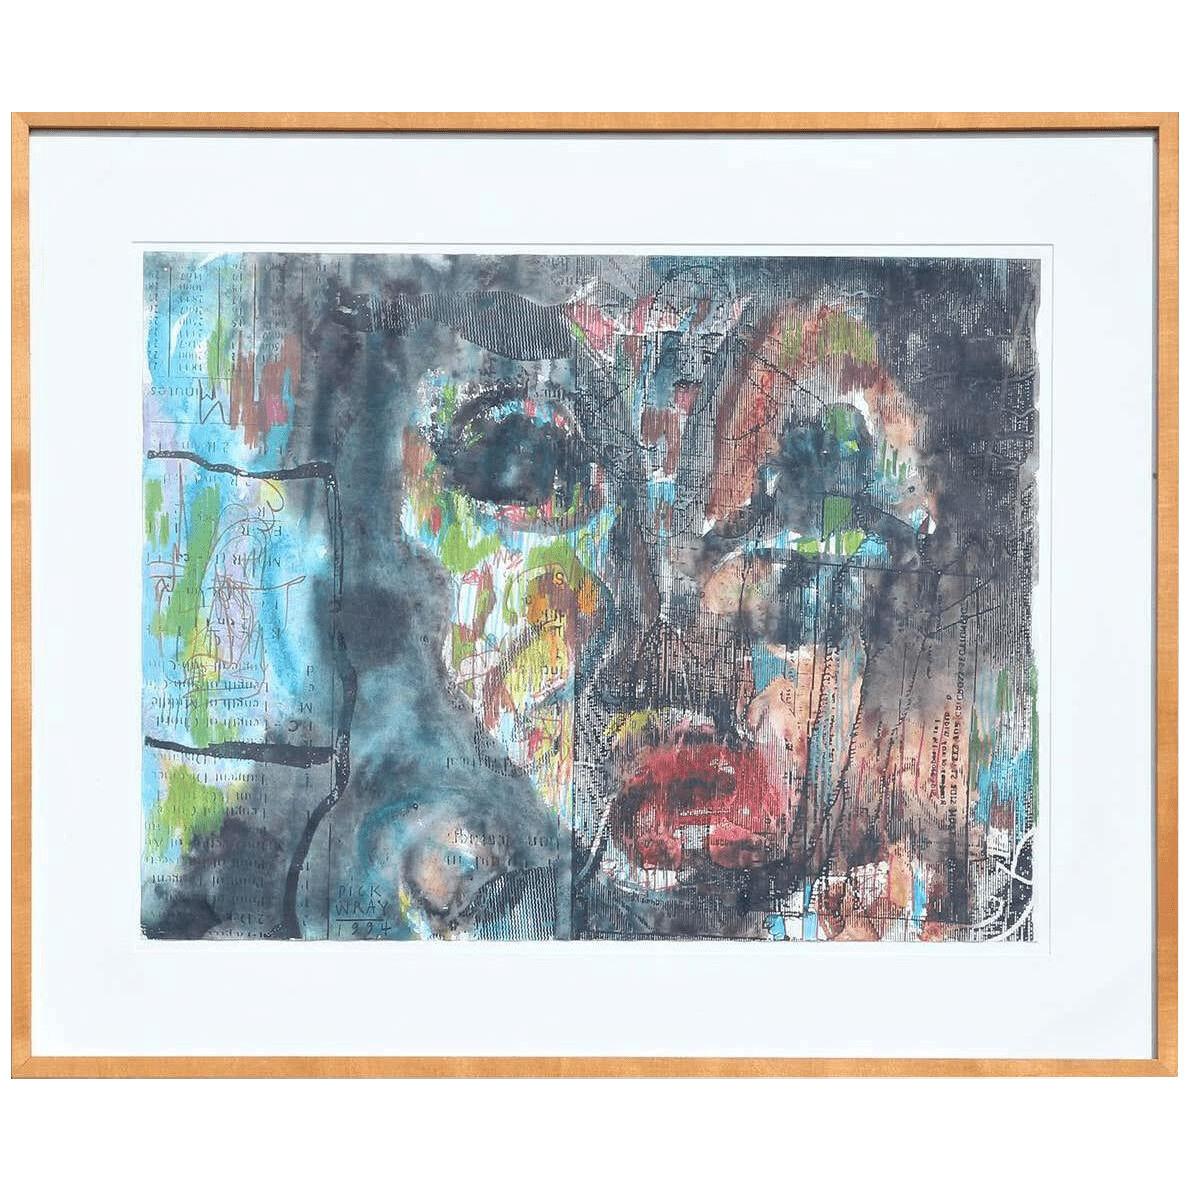 1994 Dick Wray "Untitled (Face)" Abstract Mixed Media Portrait Painting, Framed